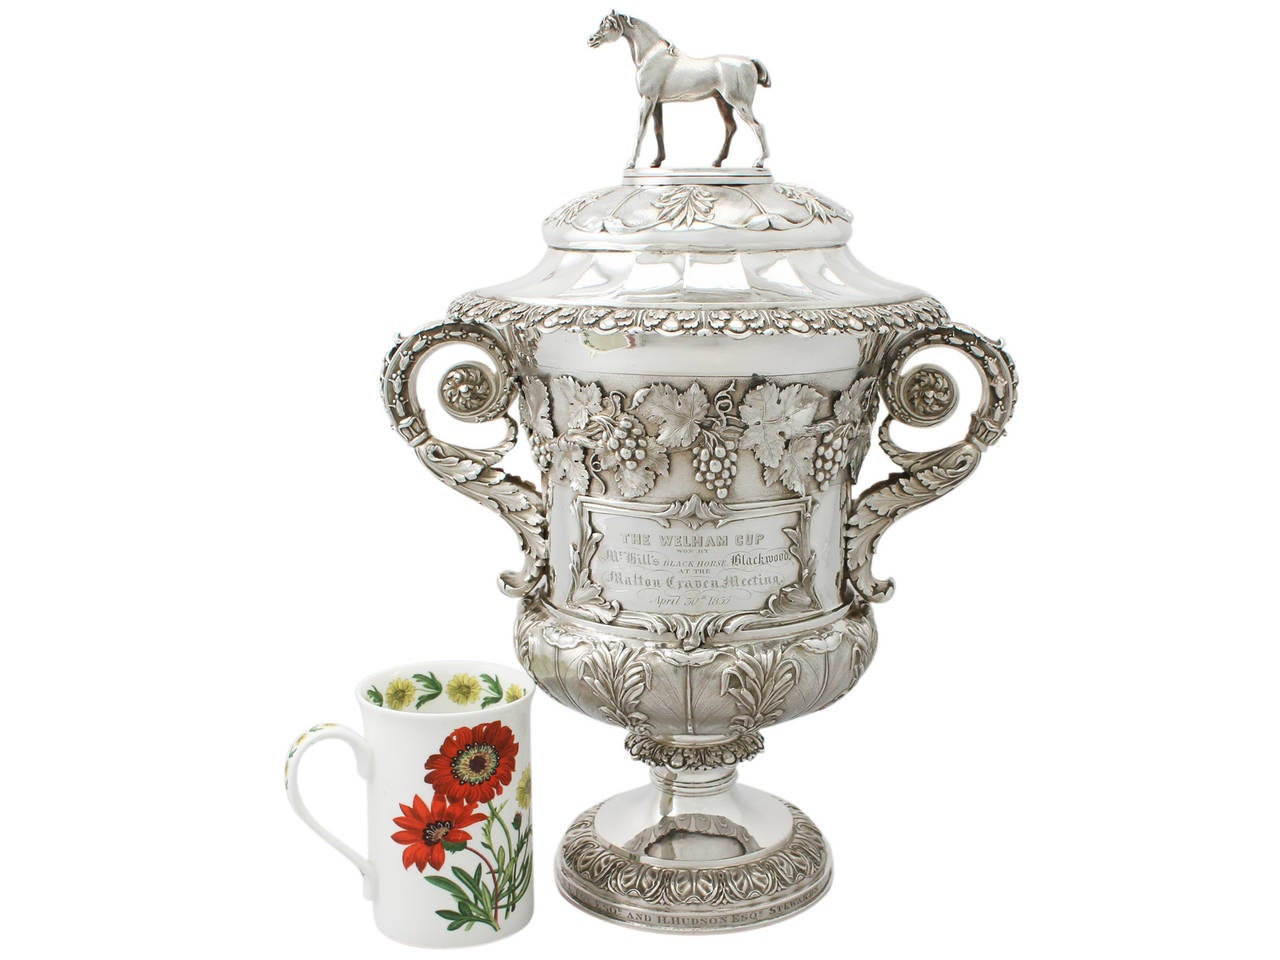 An exceptional, fine and impressive, large antique George IV English sterling silver racing presentation cup with cover: An addition to our presentation silverware collection.

 This exceptional antique George IV silver presentation cup has a